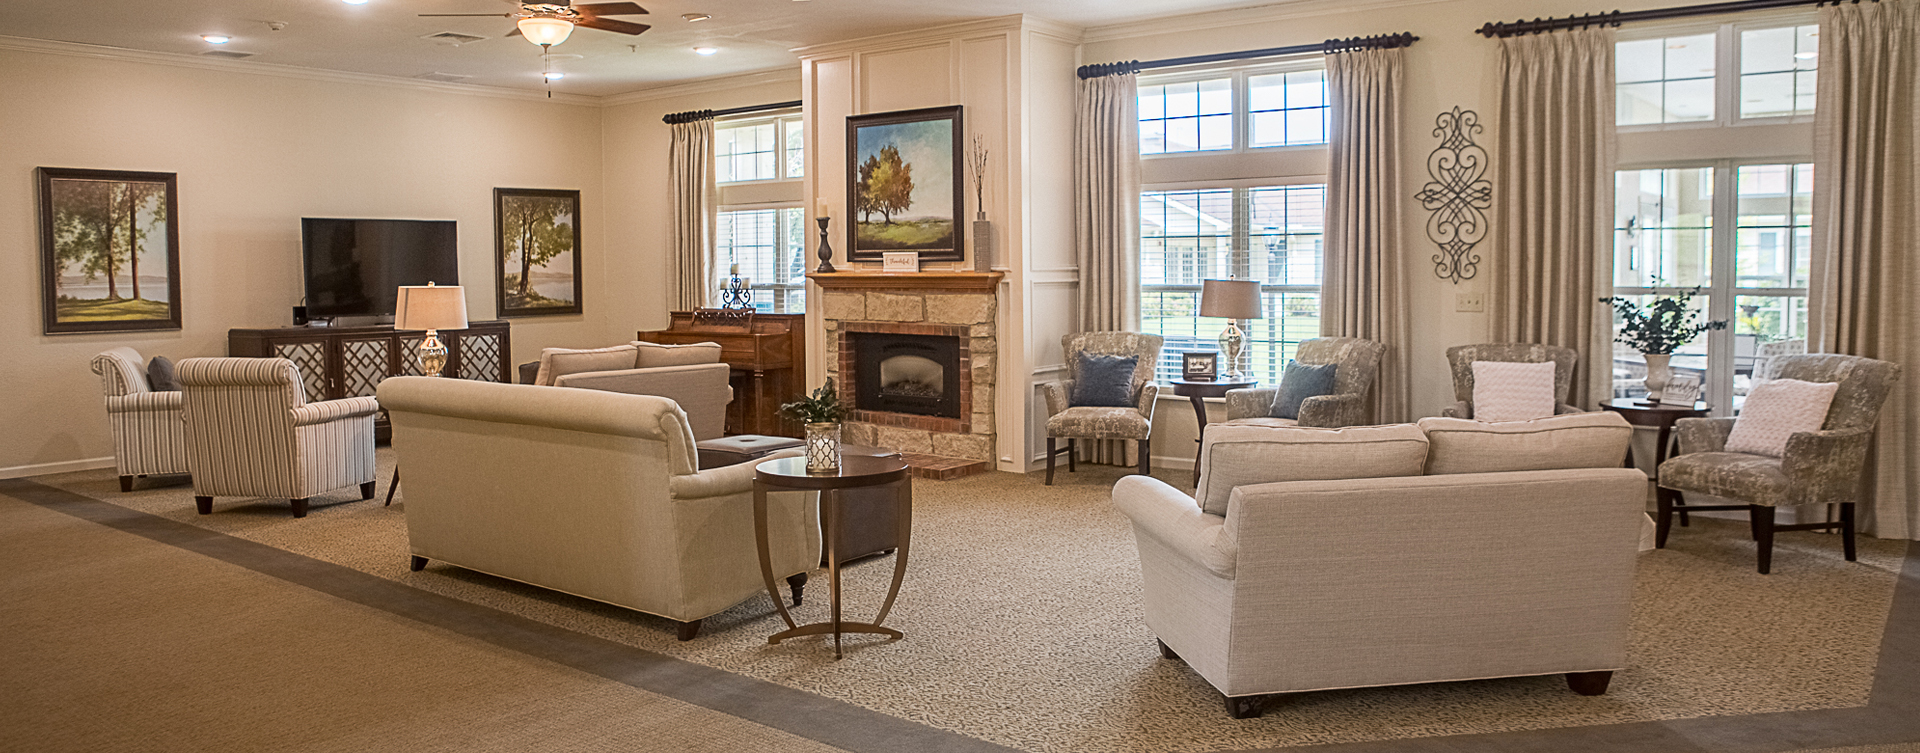 Socialize with friends in the living room at Bickford of Clinton